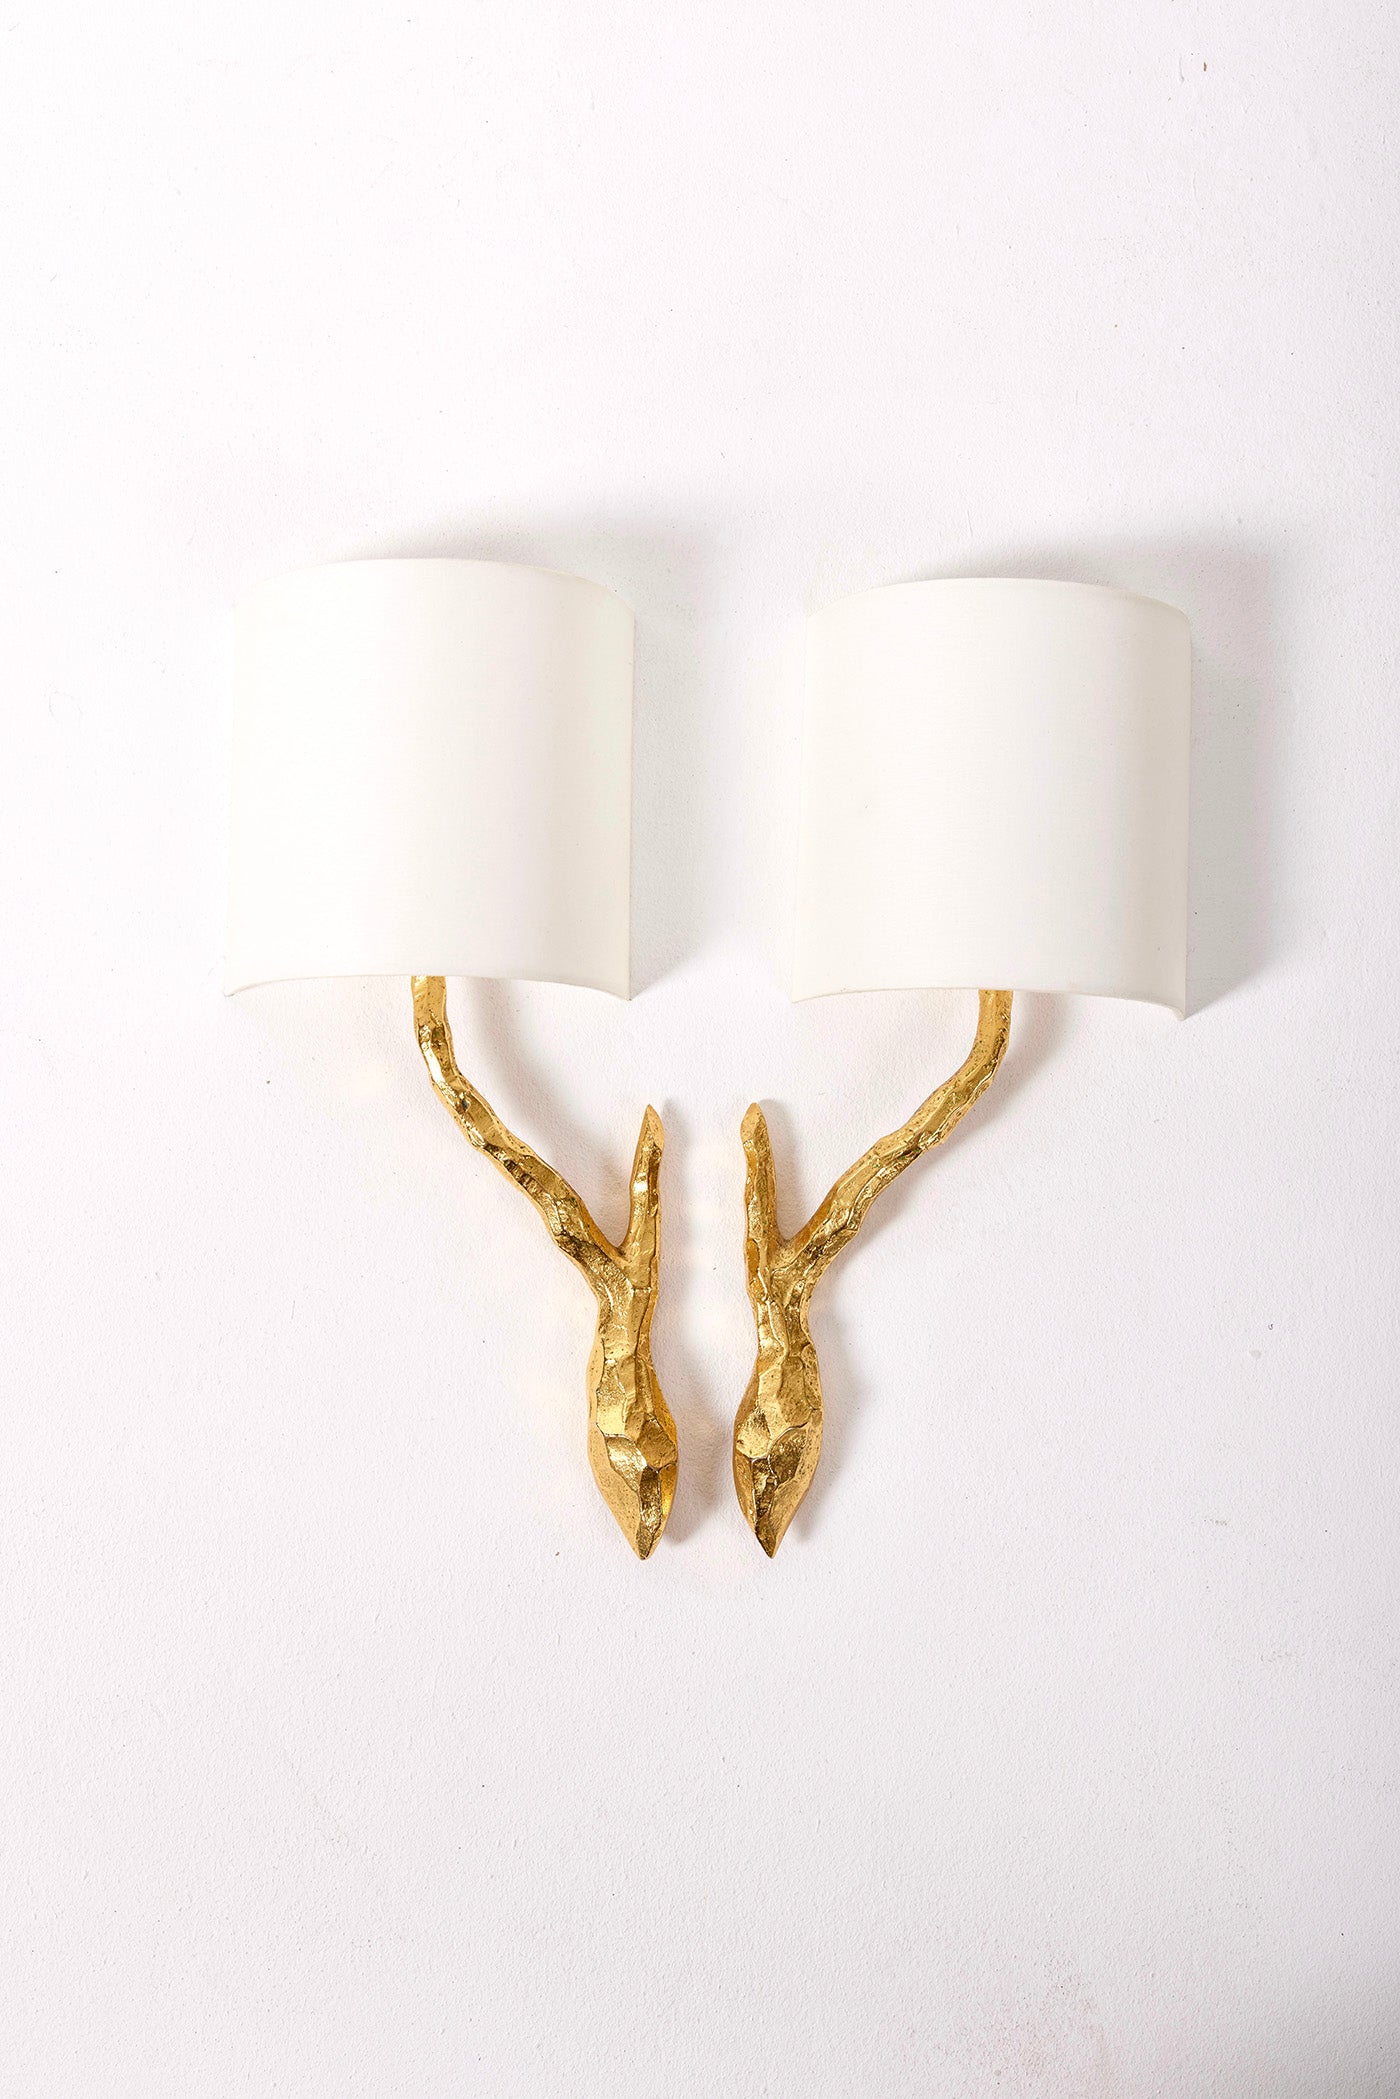 Pair of gilt bronze wall lights from Maison Arlus, 1960s, France